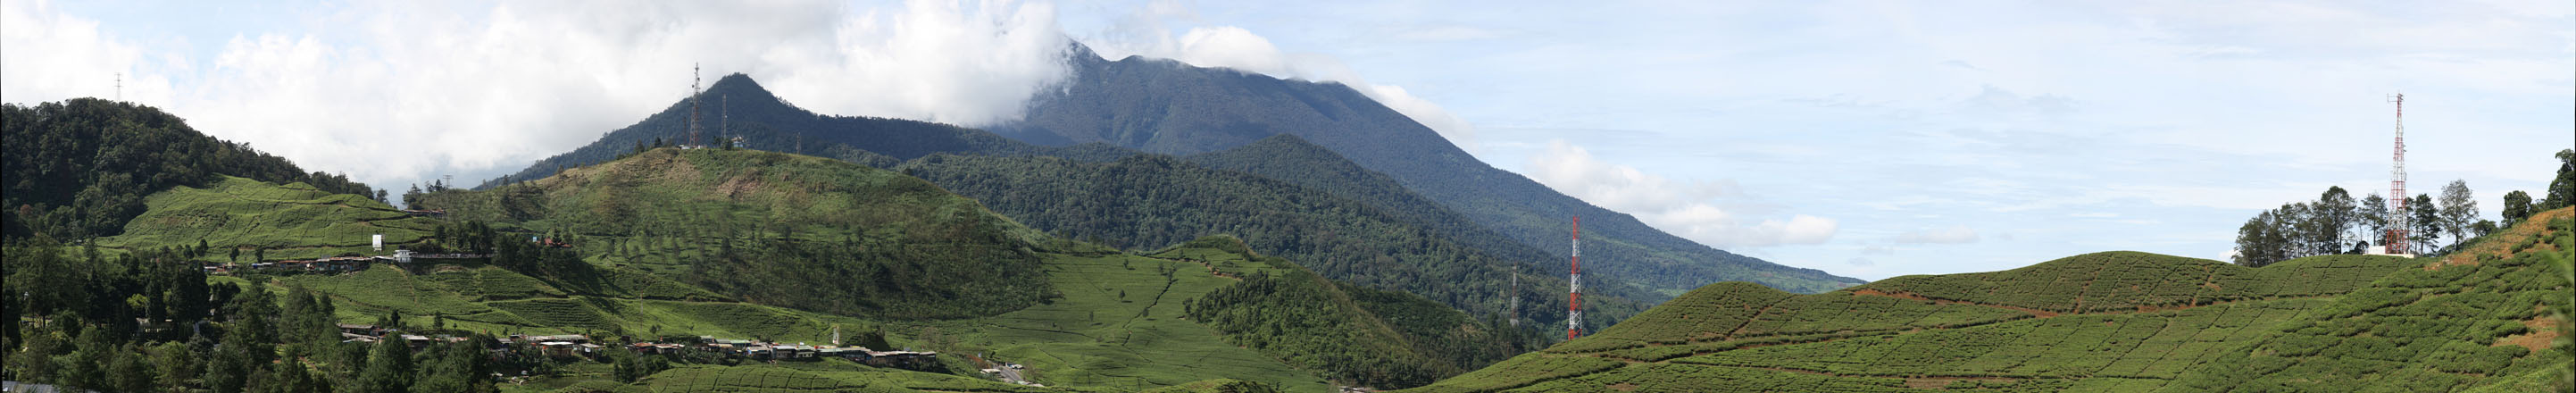 A view of Puncak where the riding happens